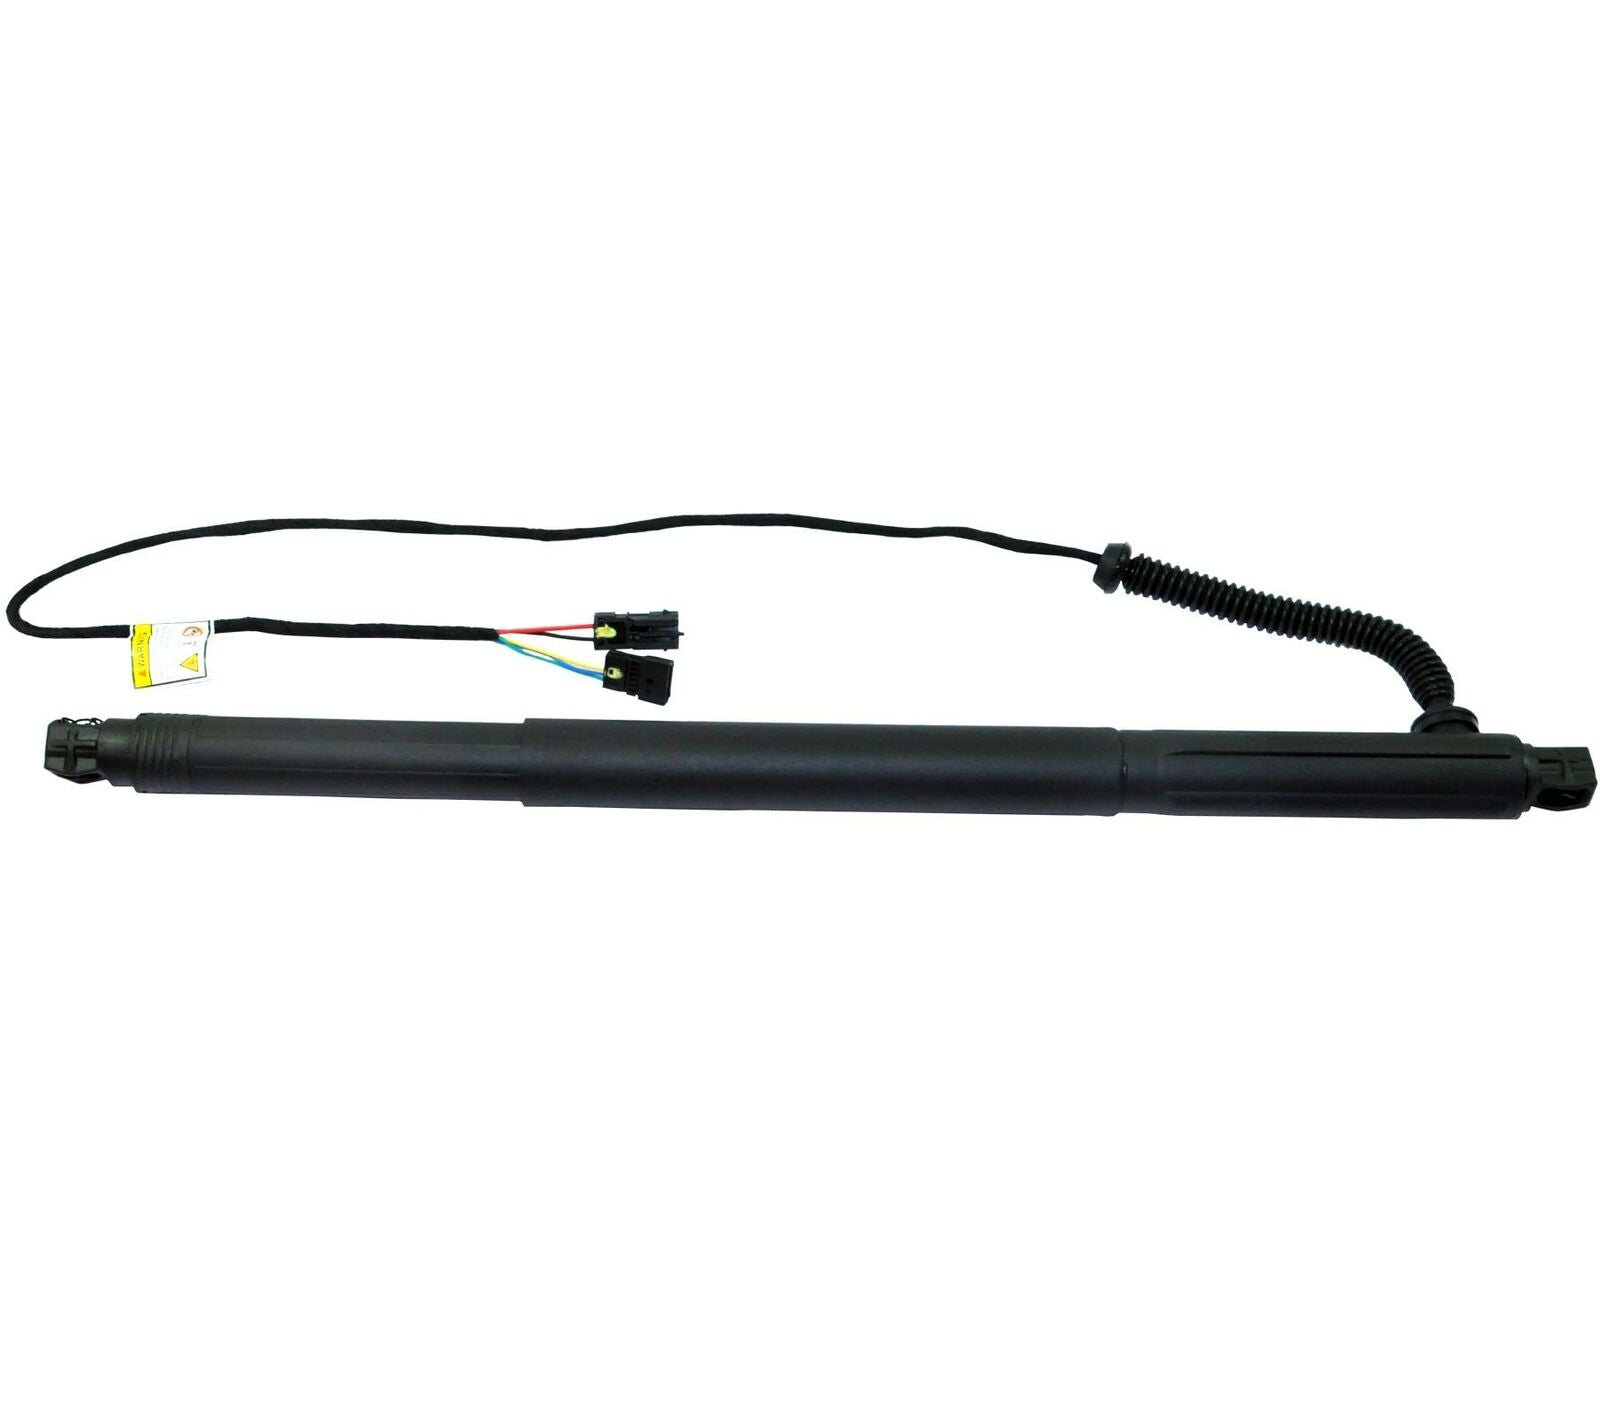 Rear Left & Right Tailgate Gas Spring Strut/Liftgate-Lift Cylinder For Bmw X6 (2007-2014)